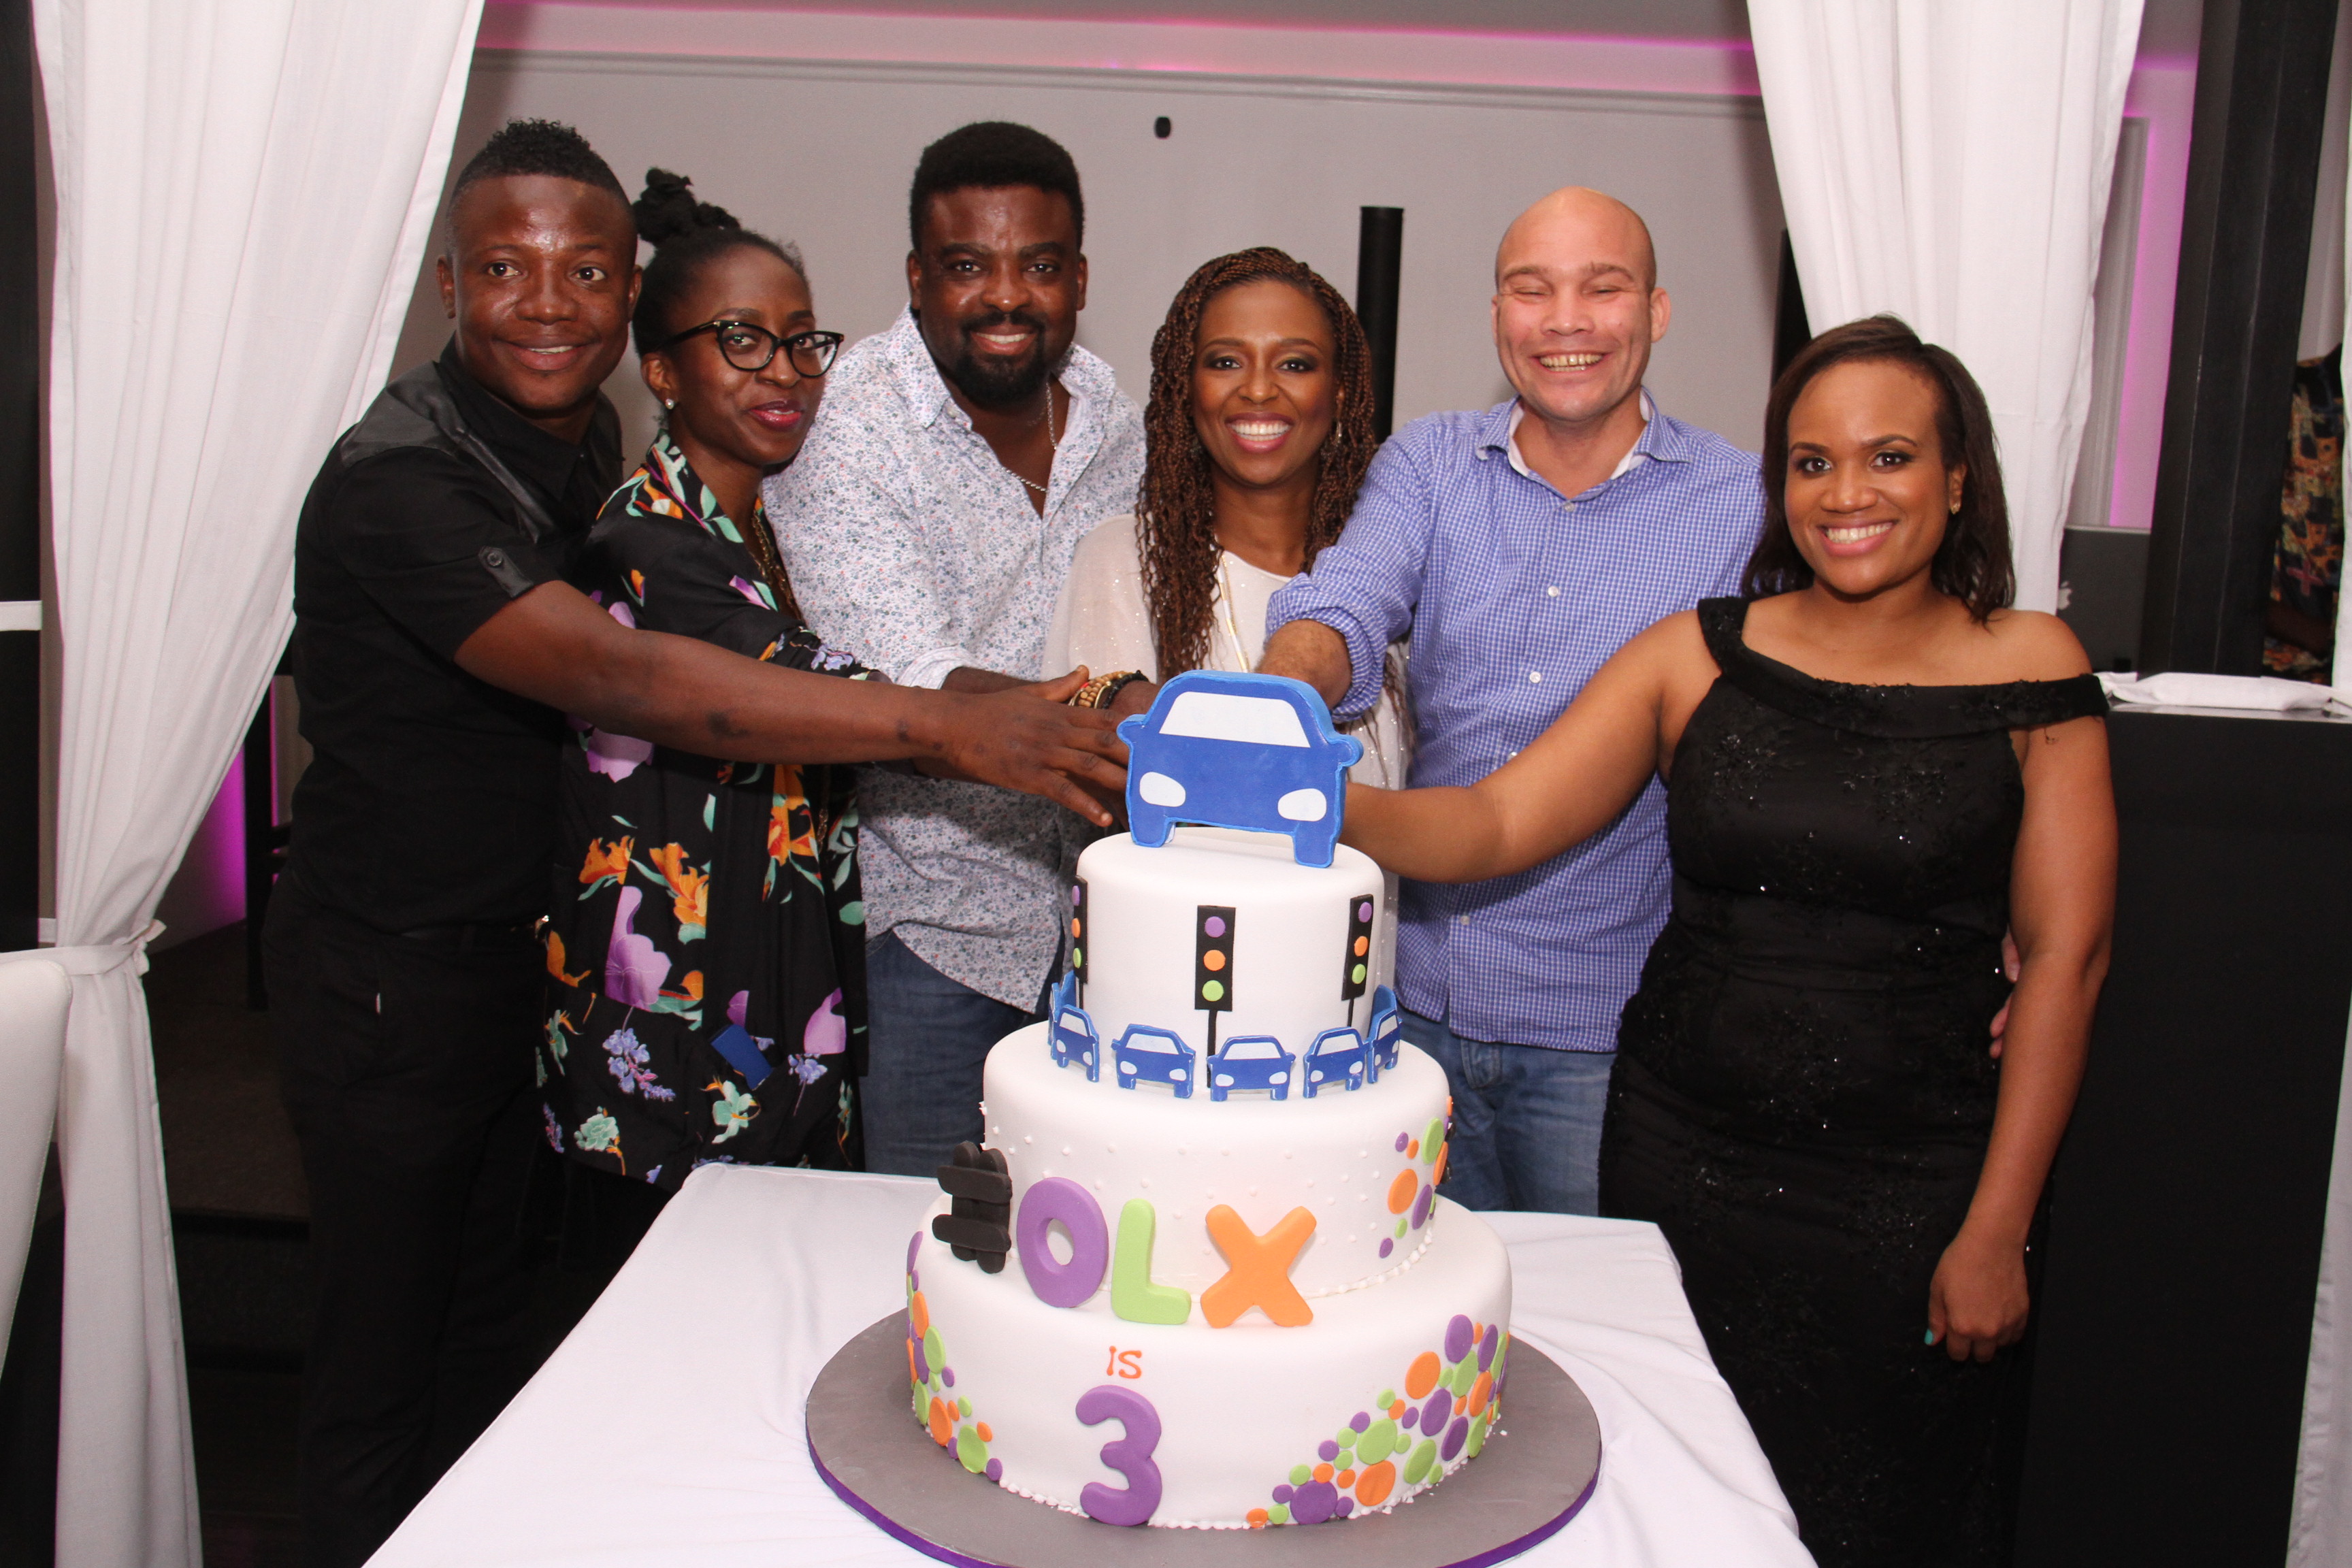 L-R Bash, Comedian & MC; Fife Aiyesimoju; Brand Marketing Manager, OLX; Kunle Afolayan; Nollywood Actor and Film Director; Lola Masha, Country Manager; OLX; Arthur Dieffenthaler; Commercial Director, Air France and Uche Nwagboso; PR & Communication Manager, OLX cutting the 3rd anniversary cake at the Rooftop Restaurant, VI. 